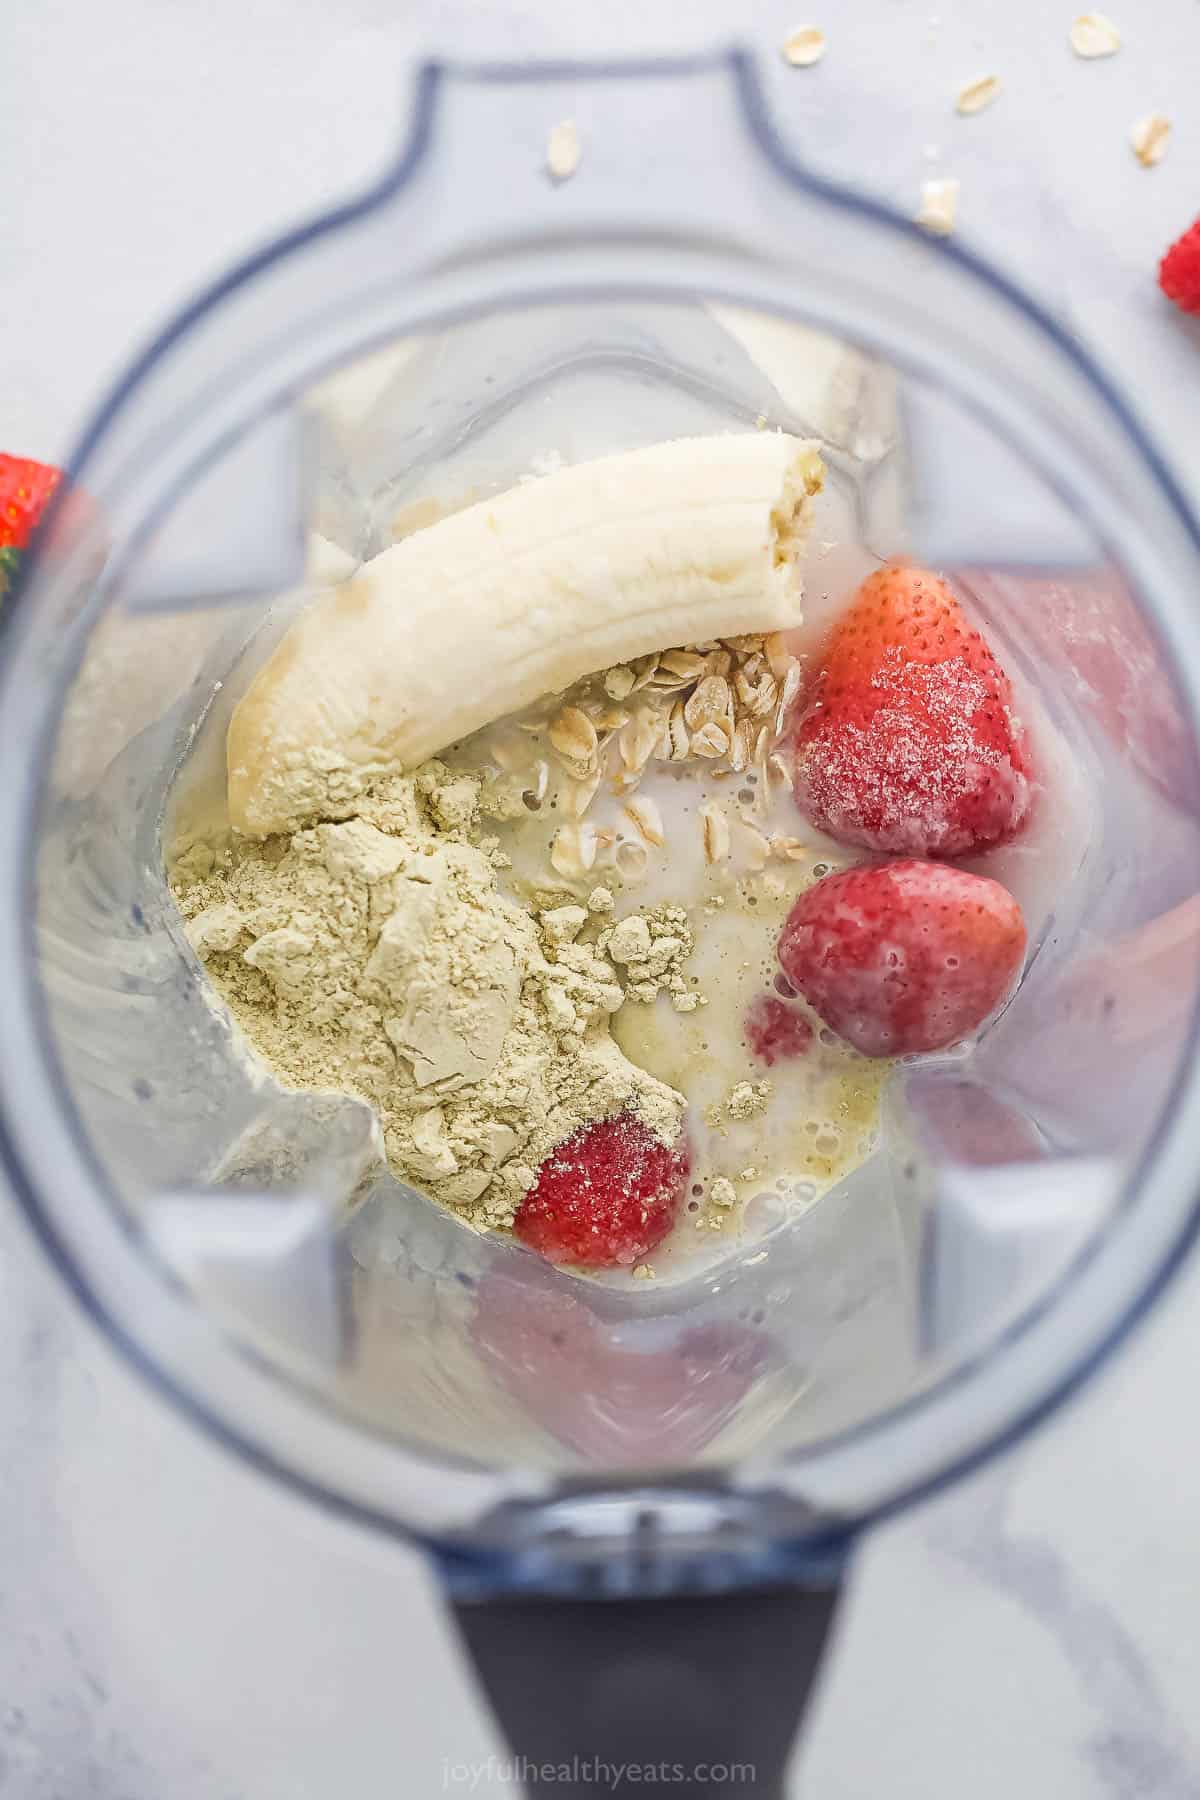 Almond milk, oats, protein powder and the rest of the smoothie ingredients inside of a blender